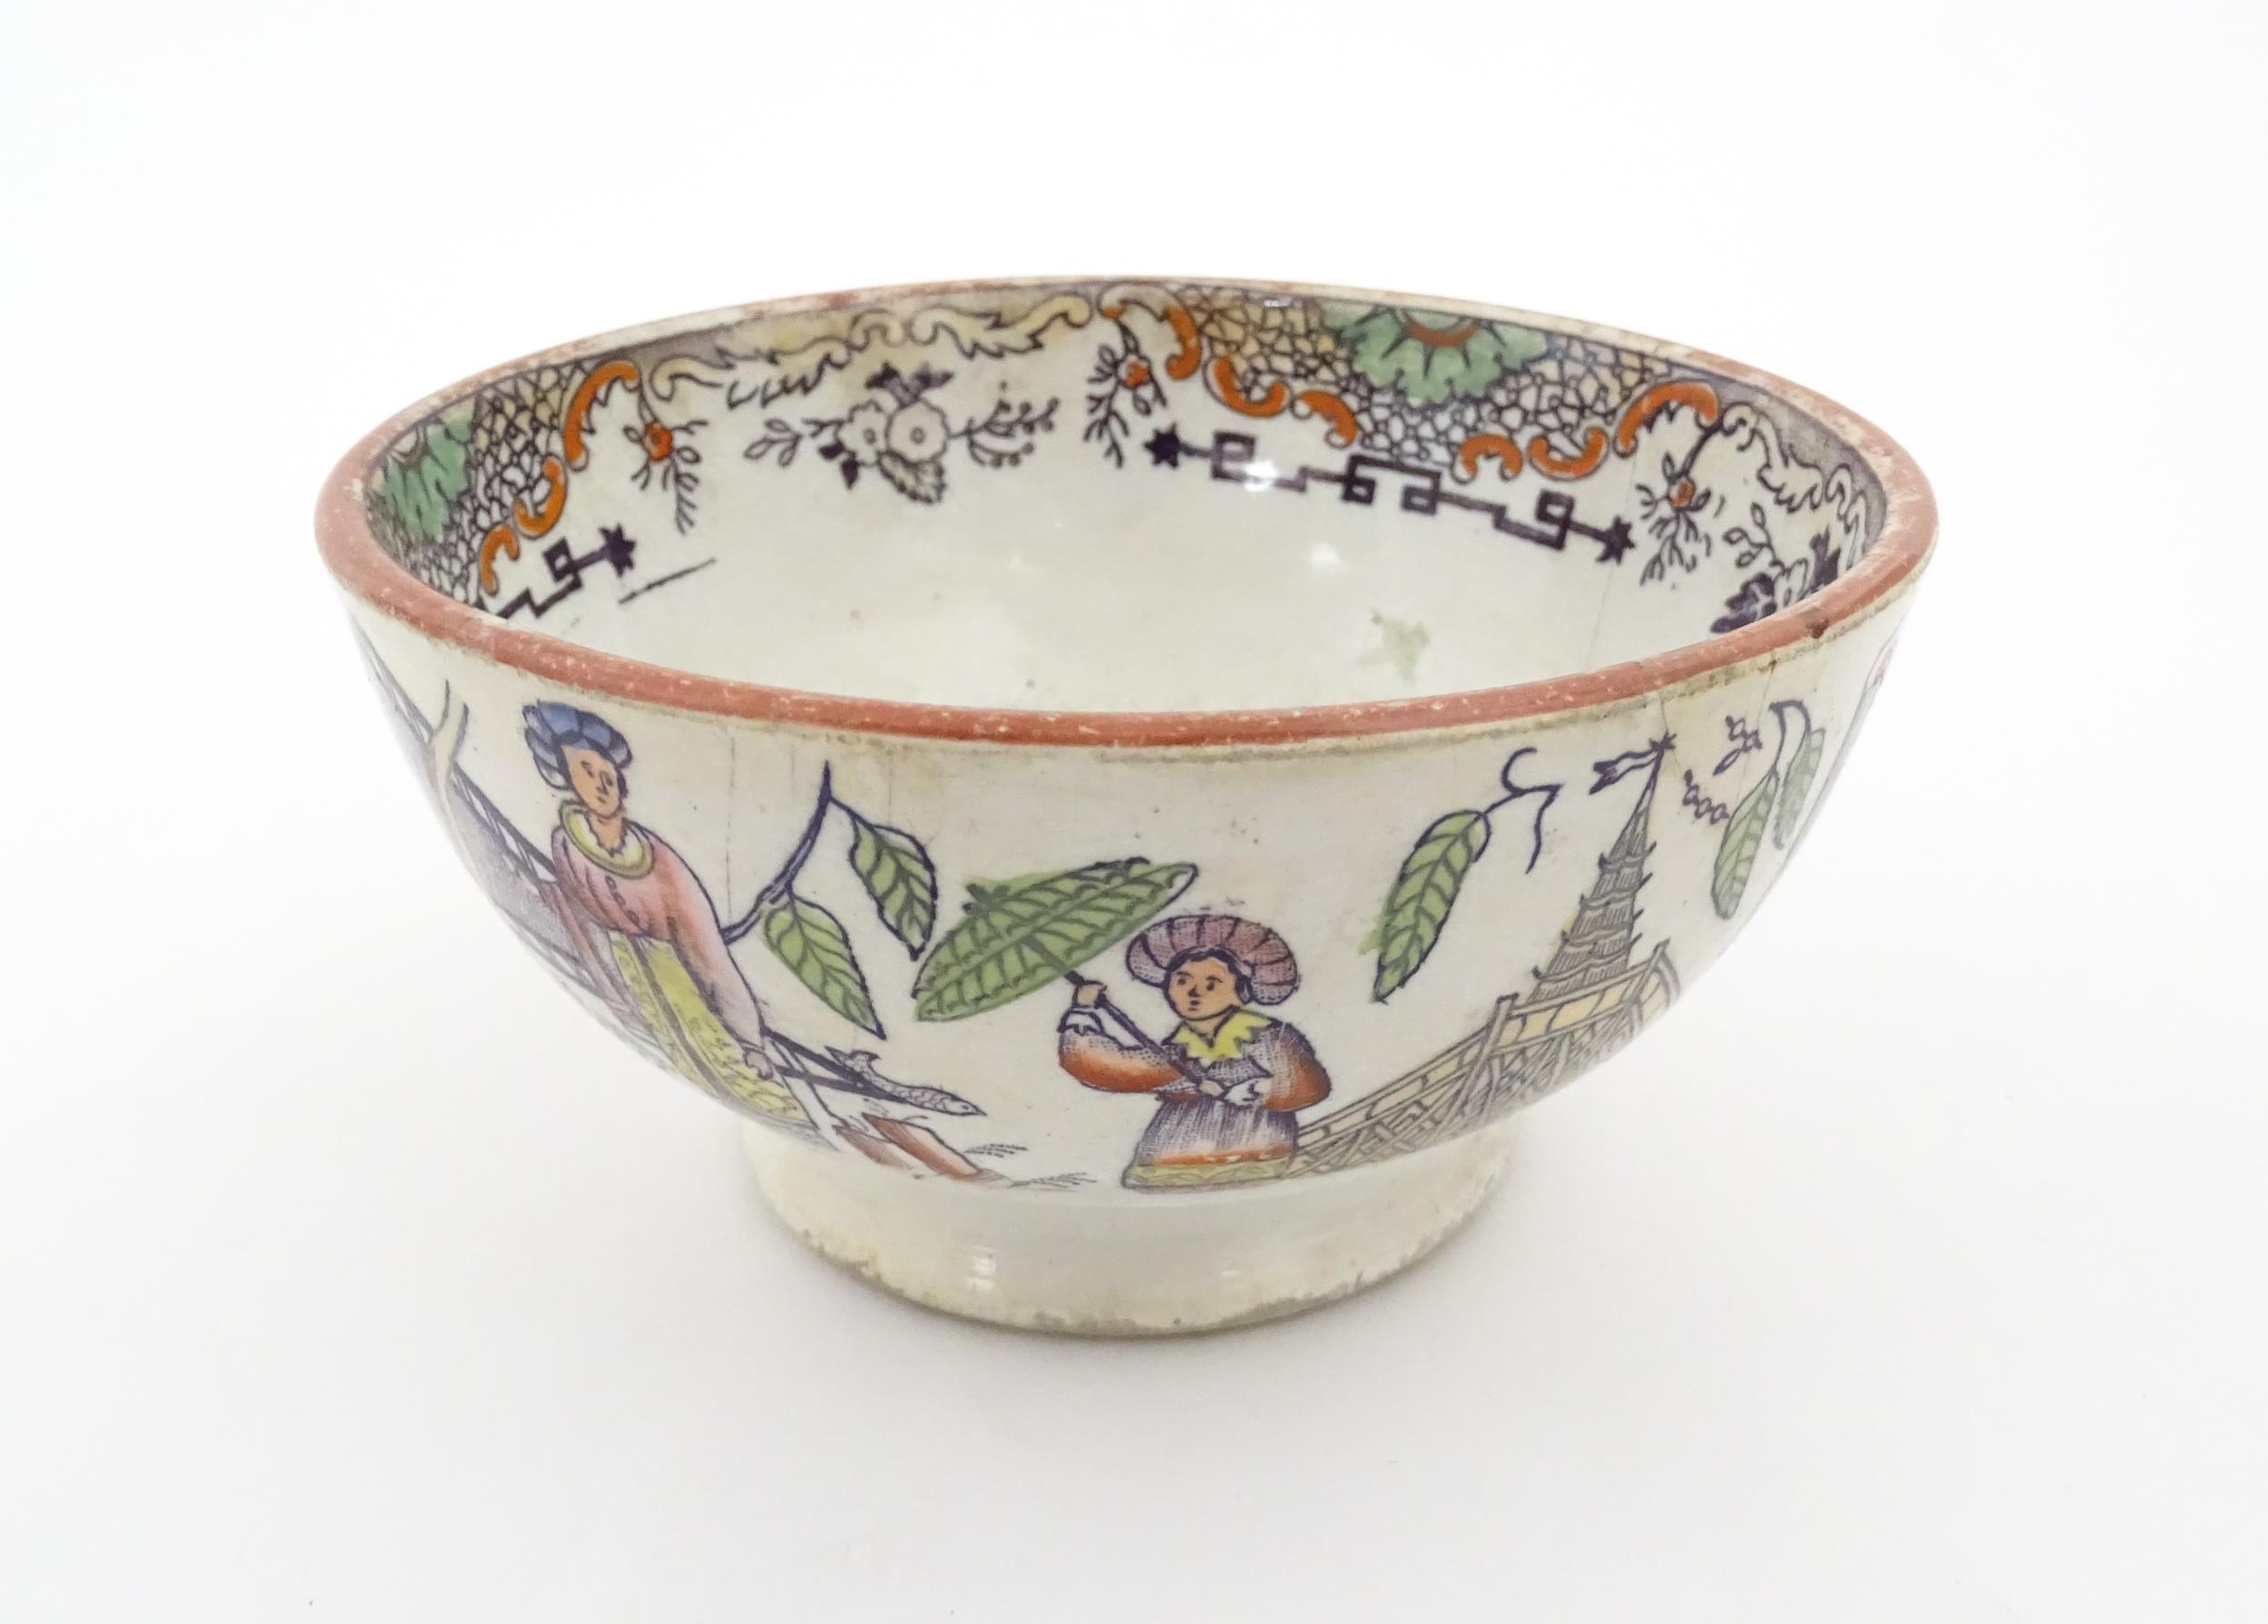 A Scottish bowl with Chinoiserie depicting figures in a landscape. Possibly Bell's Pottery. - Image 4 of 11